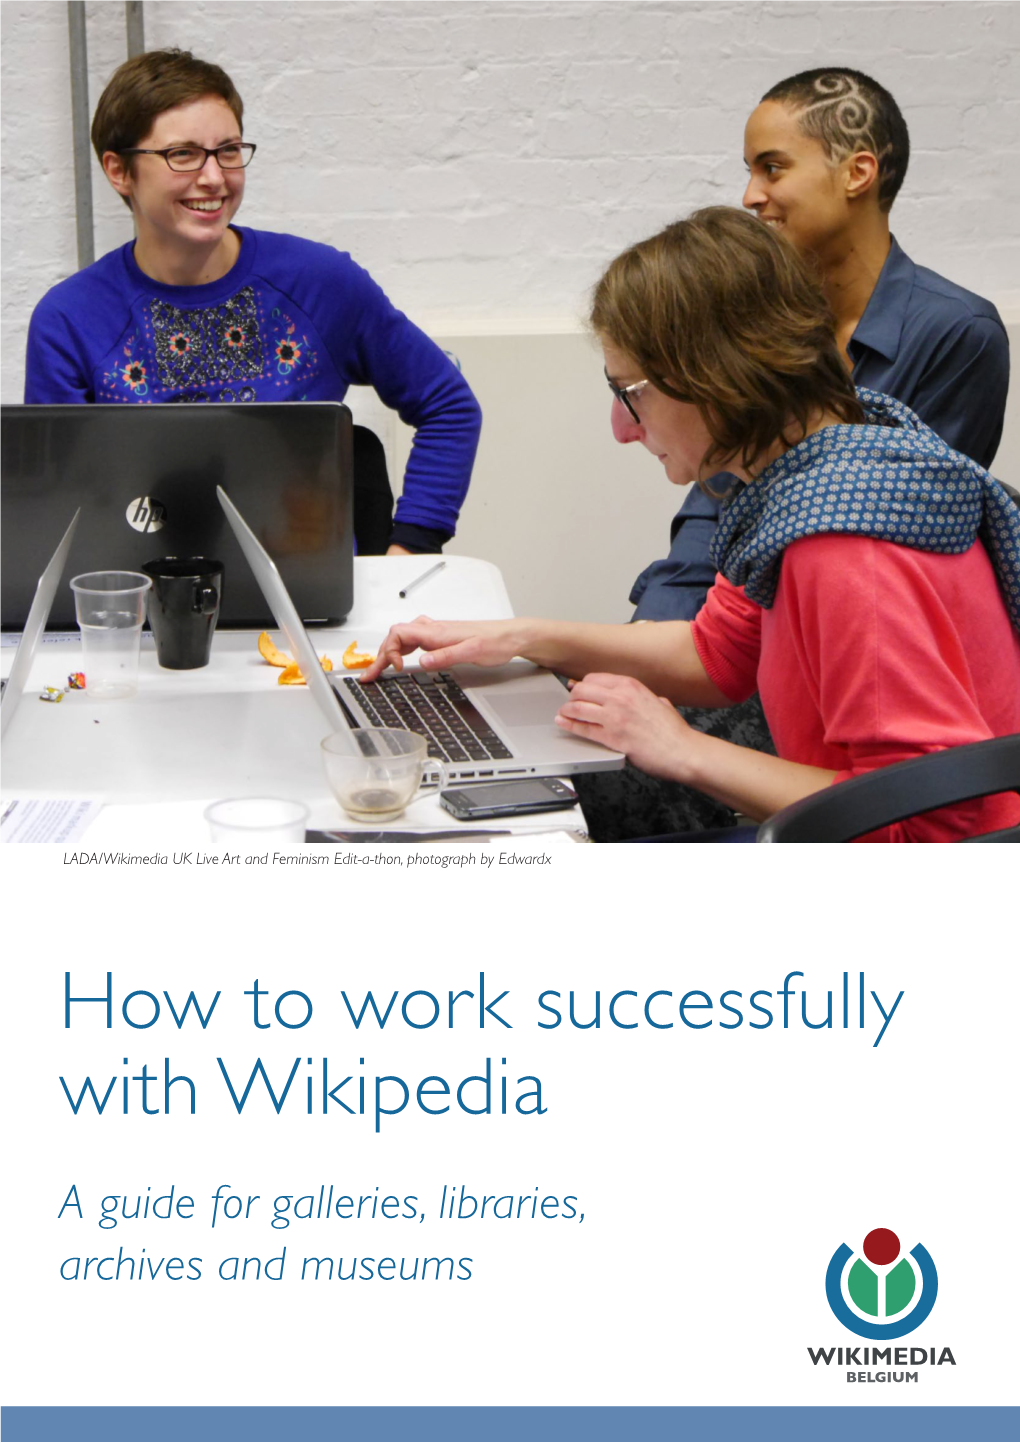 How to Work Successfully with Wikipedia